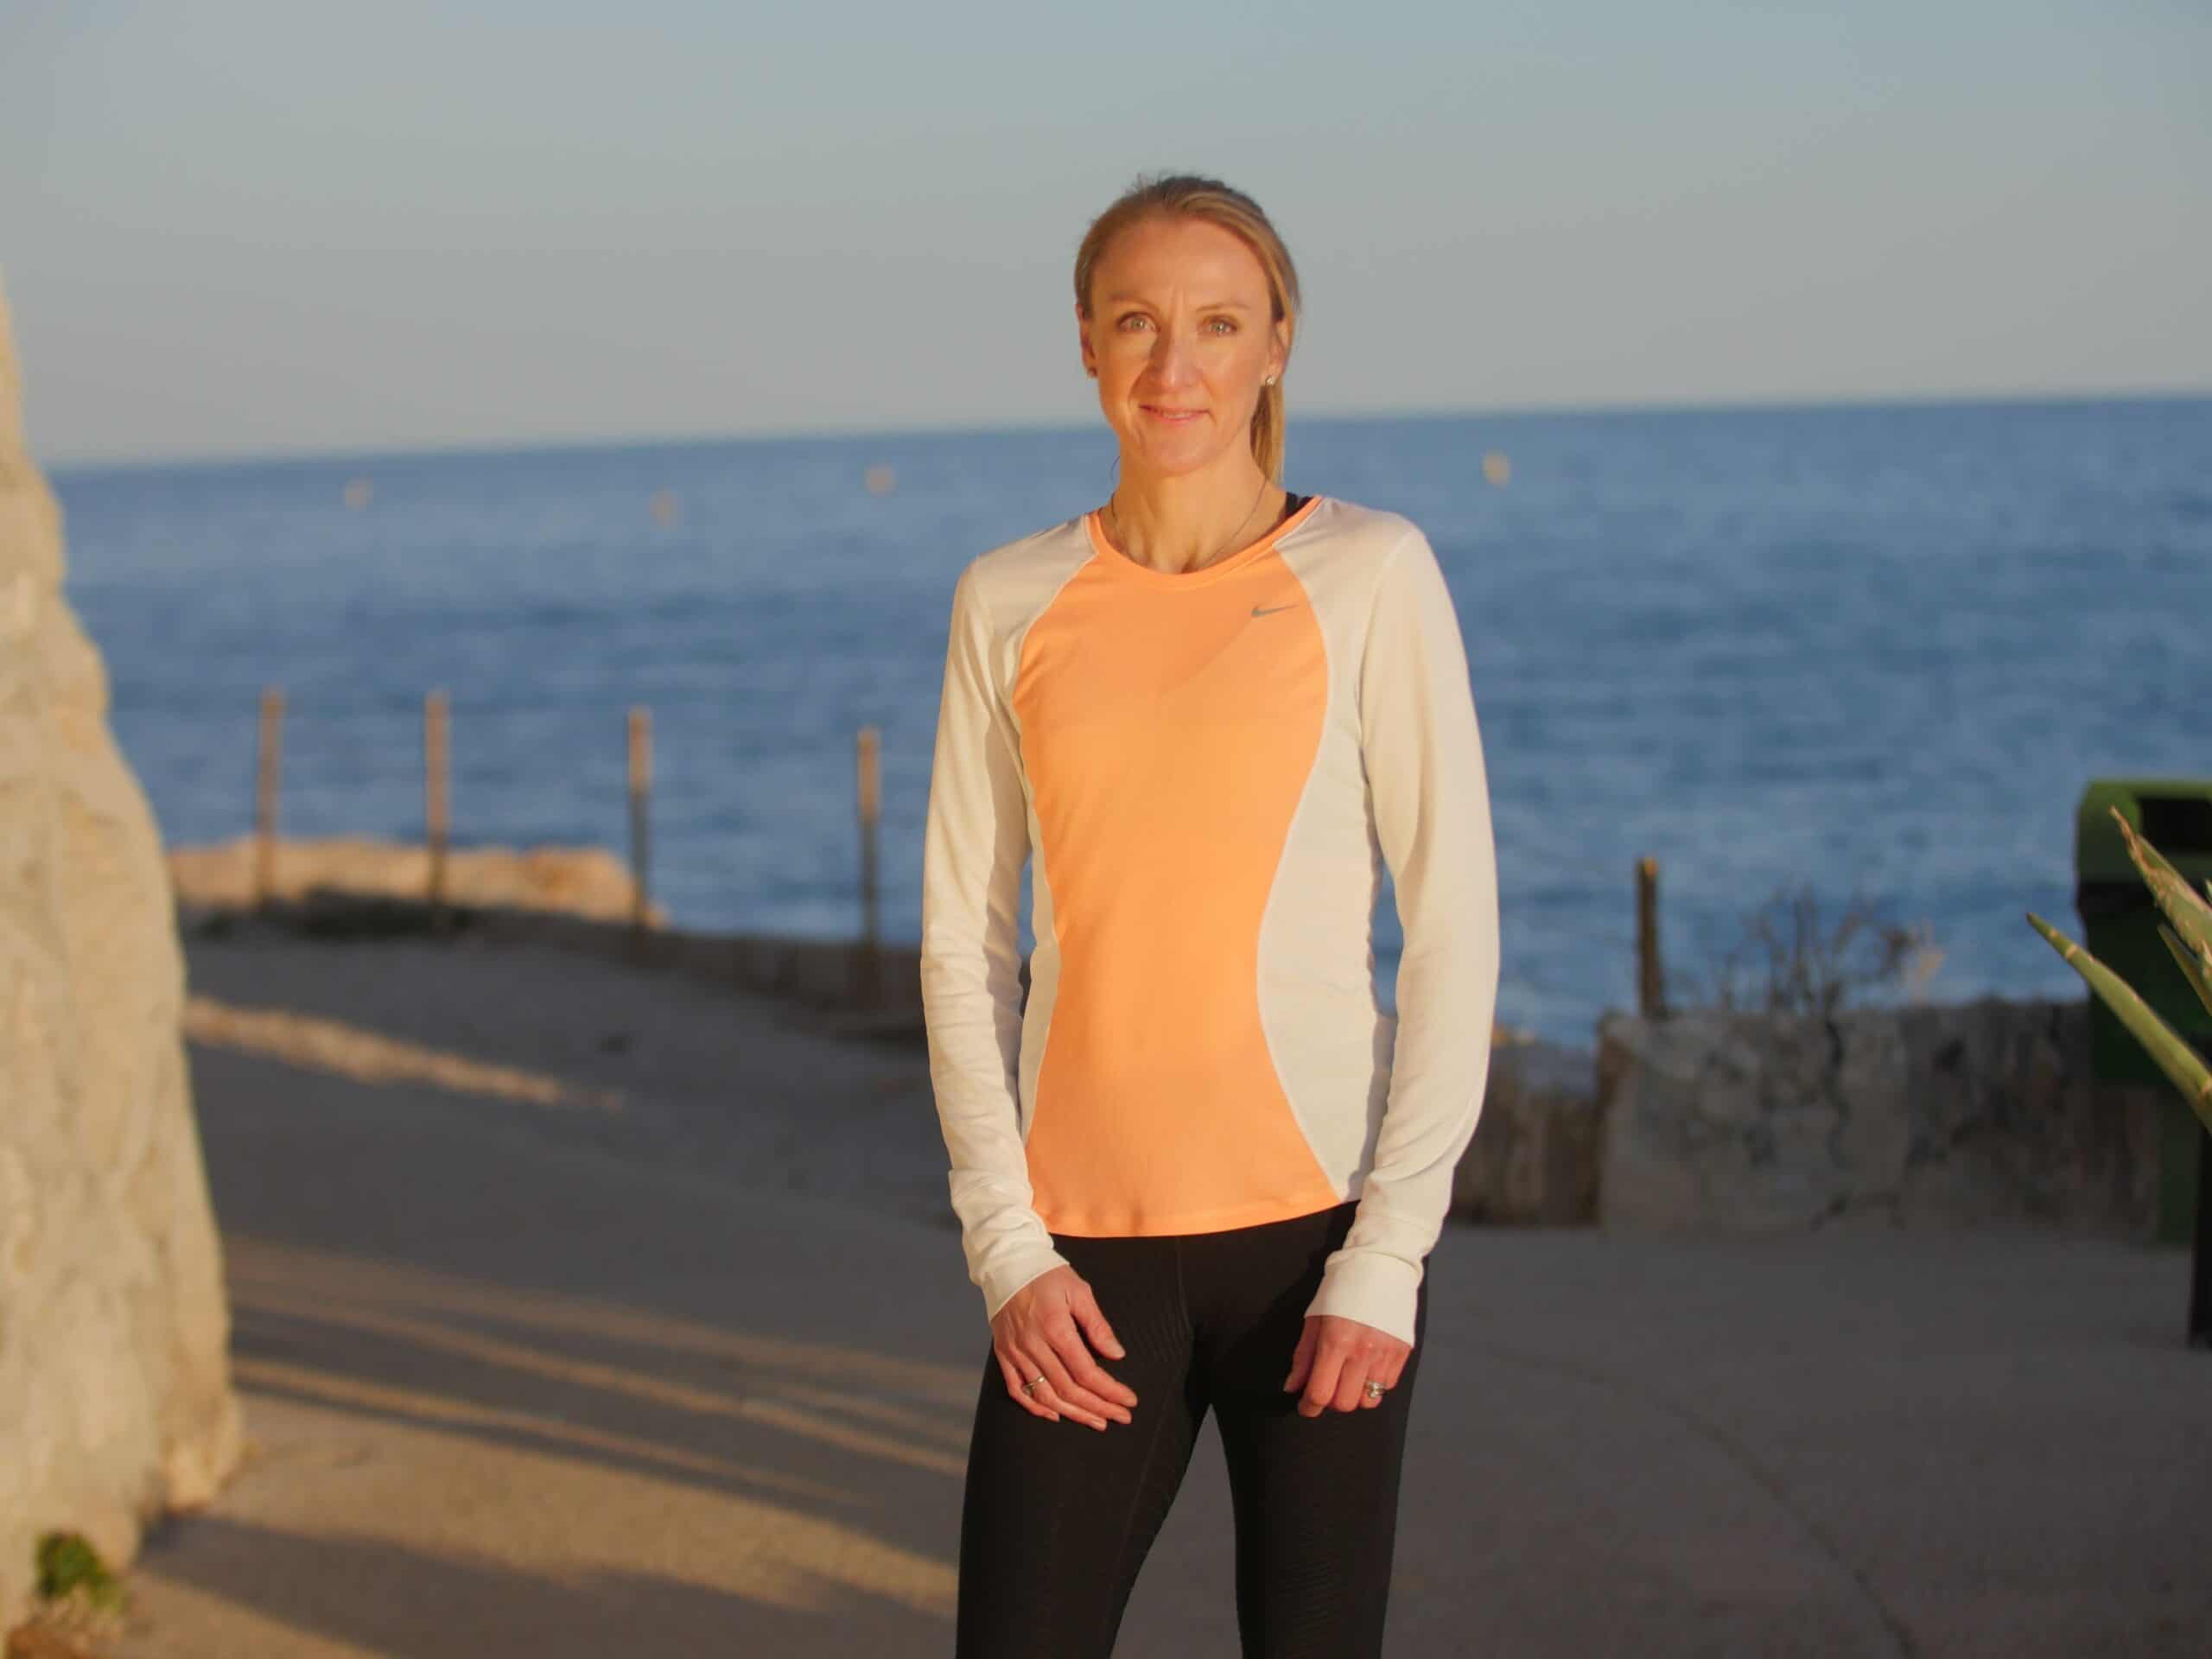 Paula radcliffe running tips to help keep you're regime on track this winter